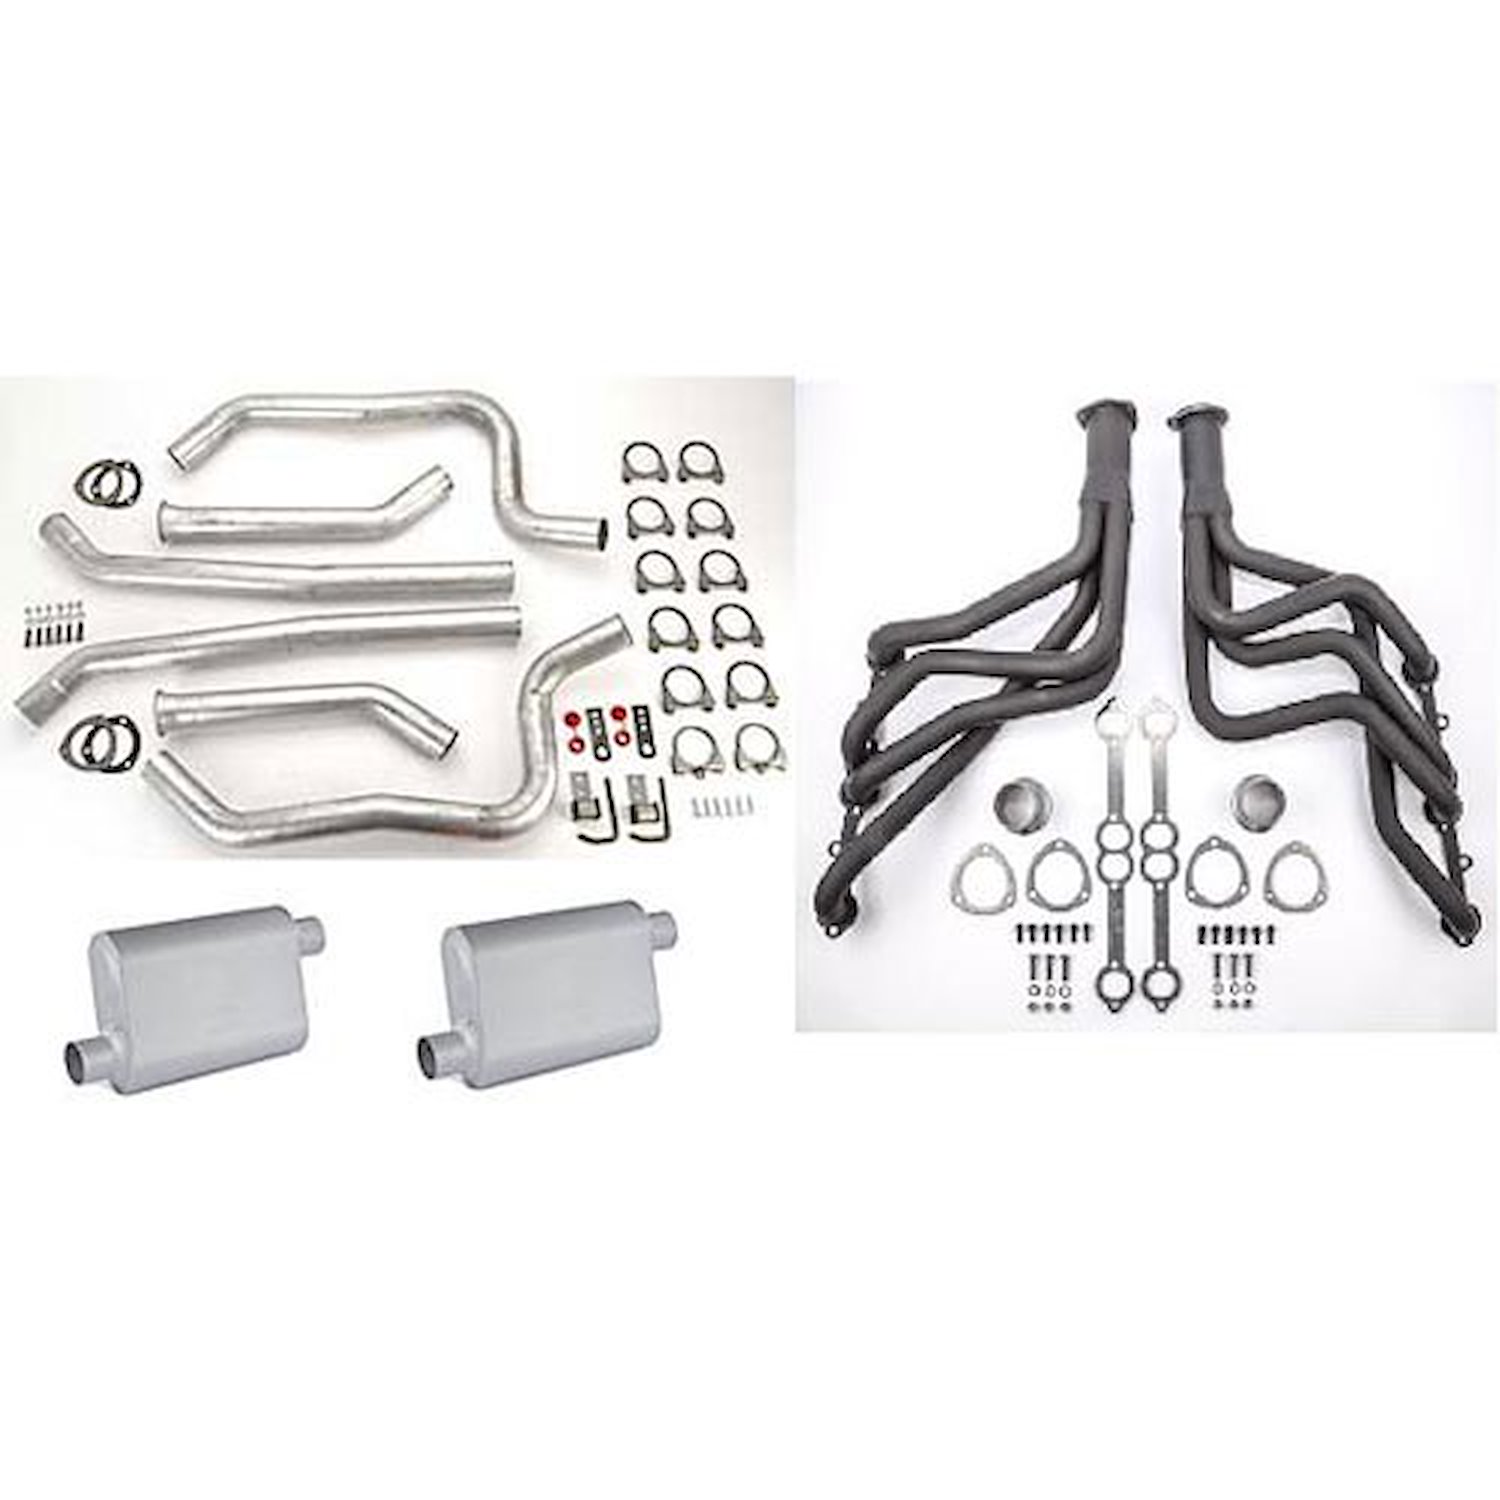 Complete Header Exhaust System Fits: (All Small Block Chevy 265-400ci) 1967-74 Camaro